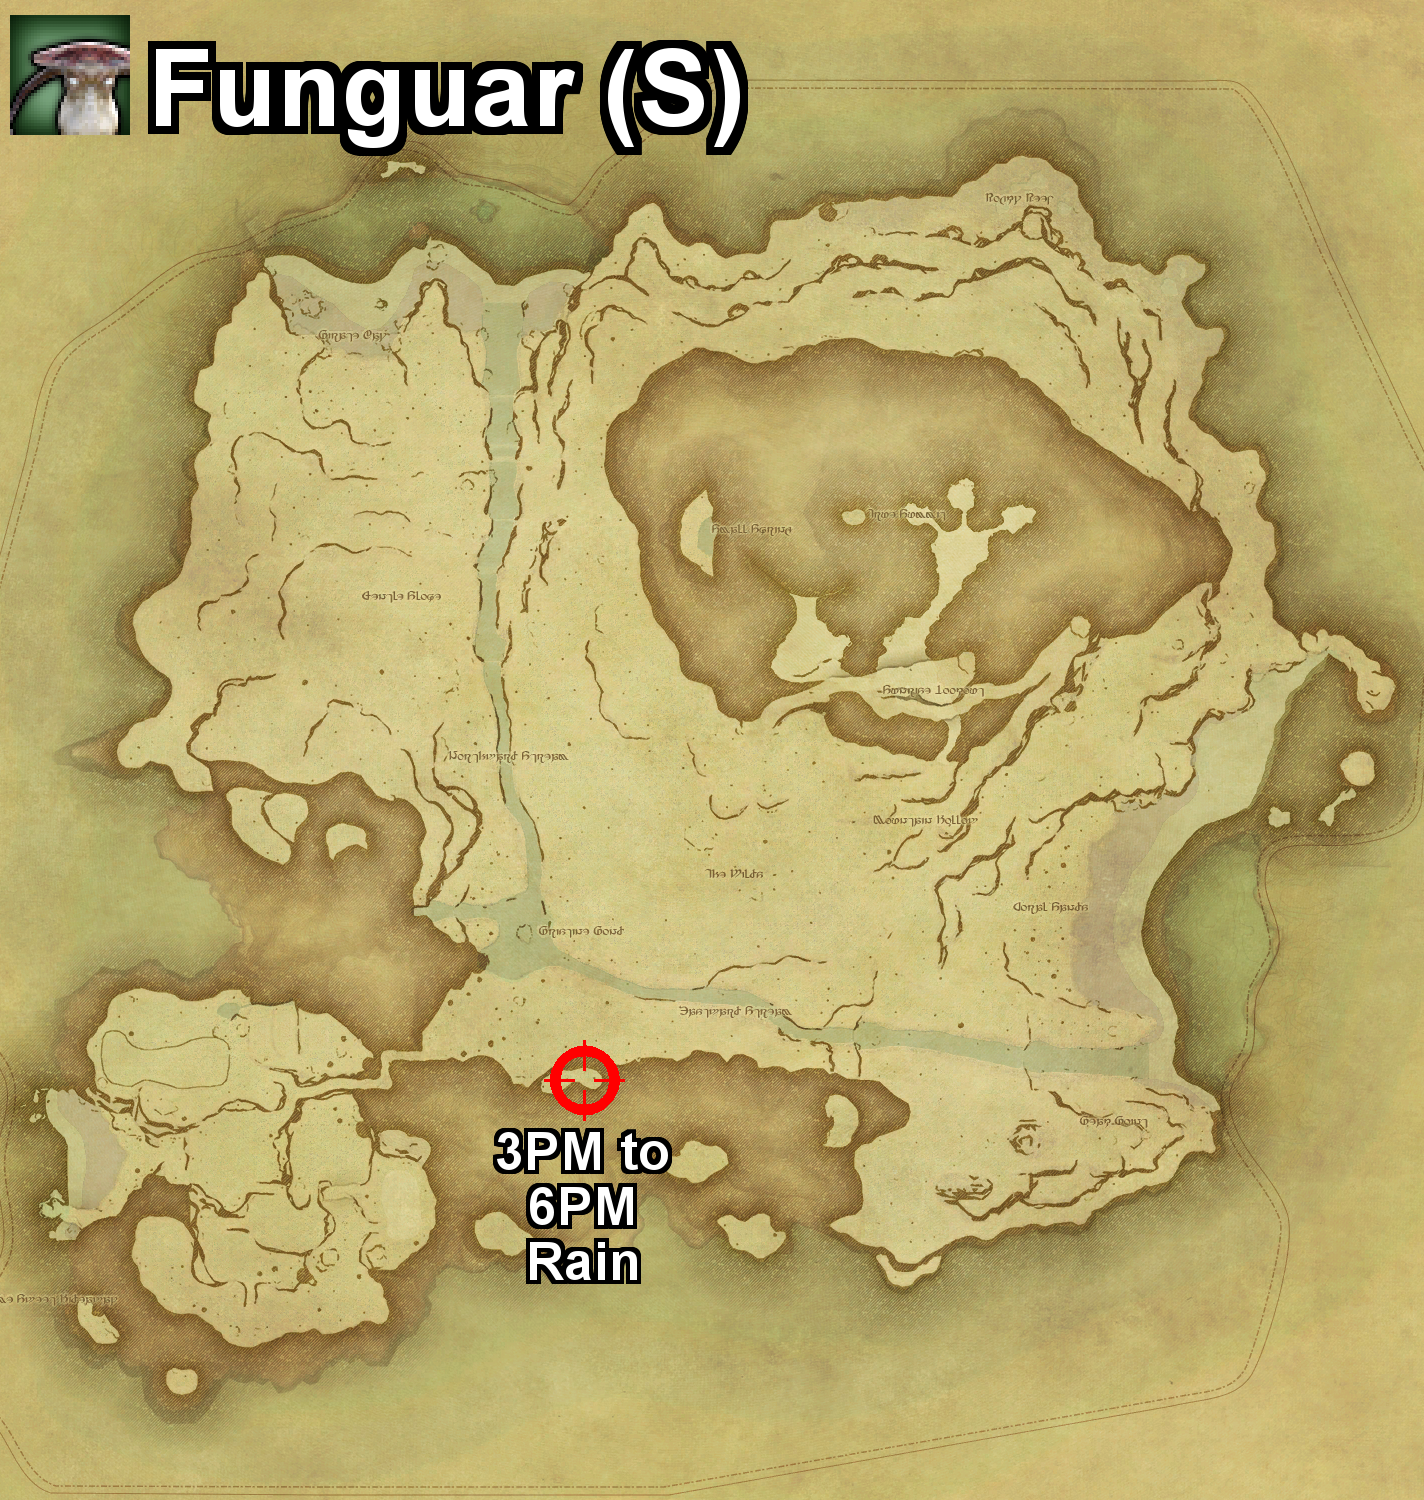 The location where the Funguar can be found, and the required conditions, on Island Sanctuary in Final Fantasy XIV.